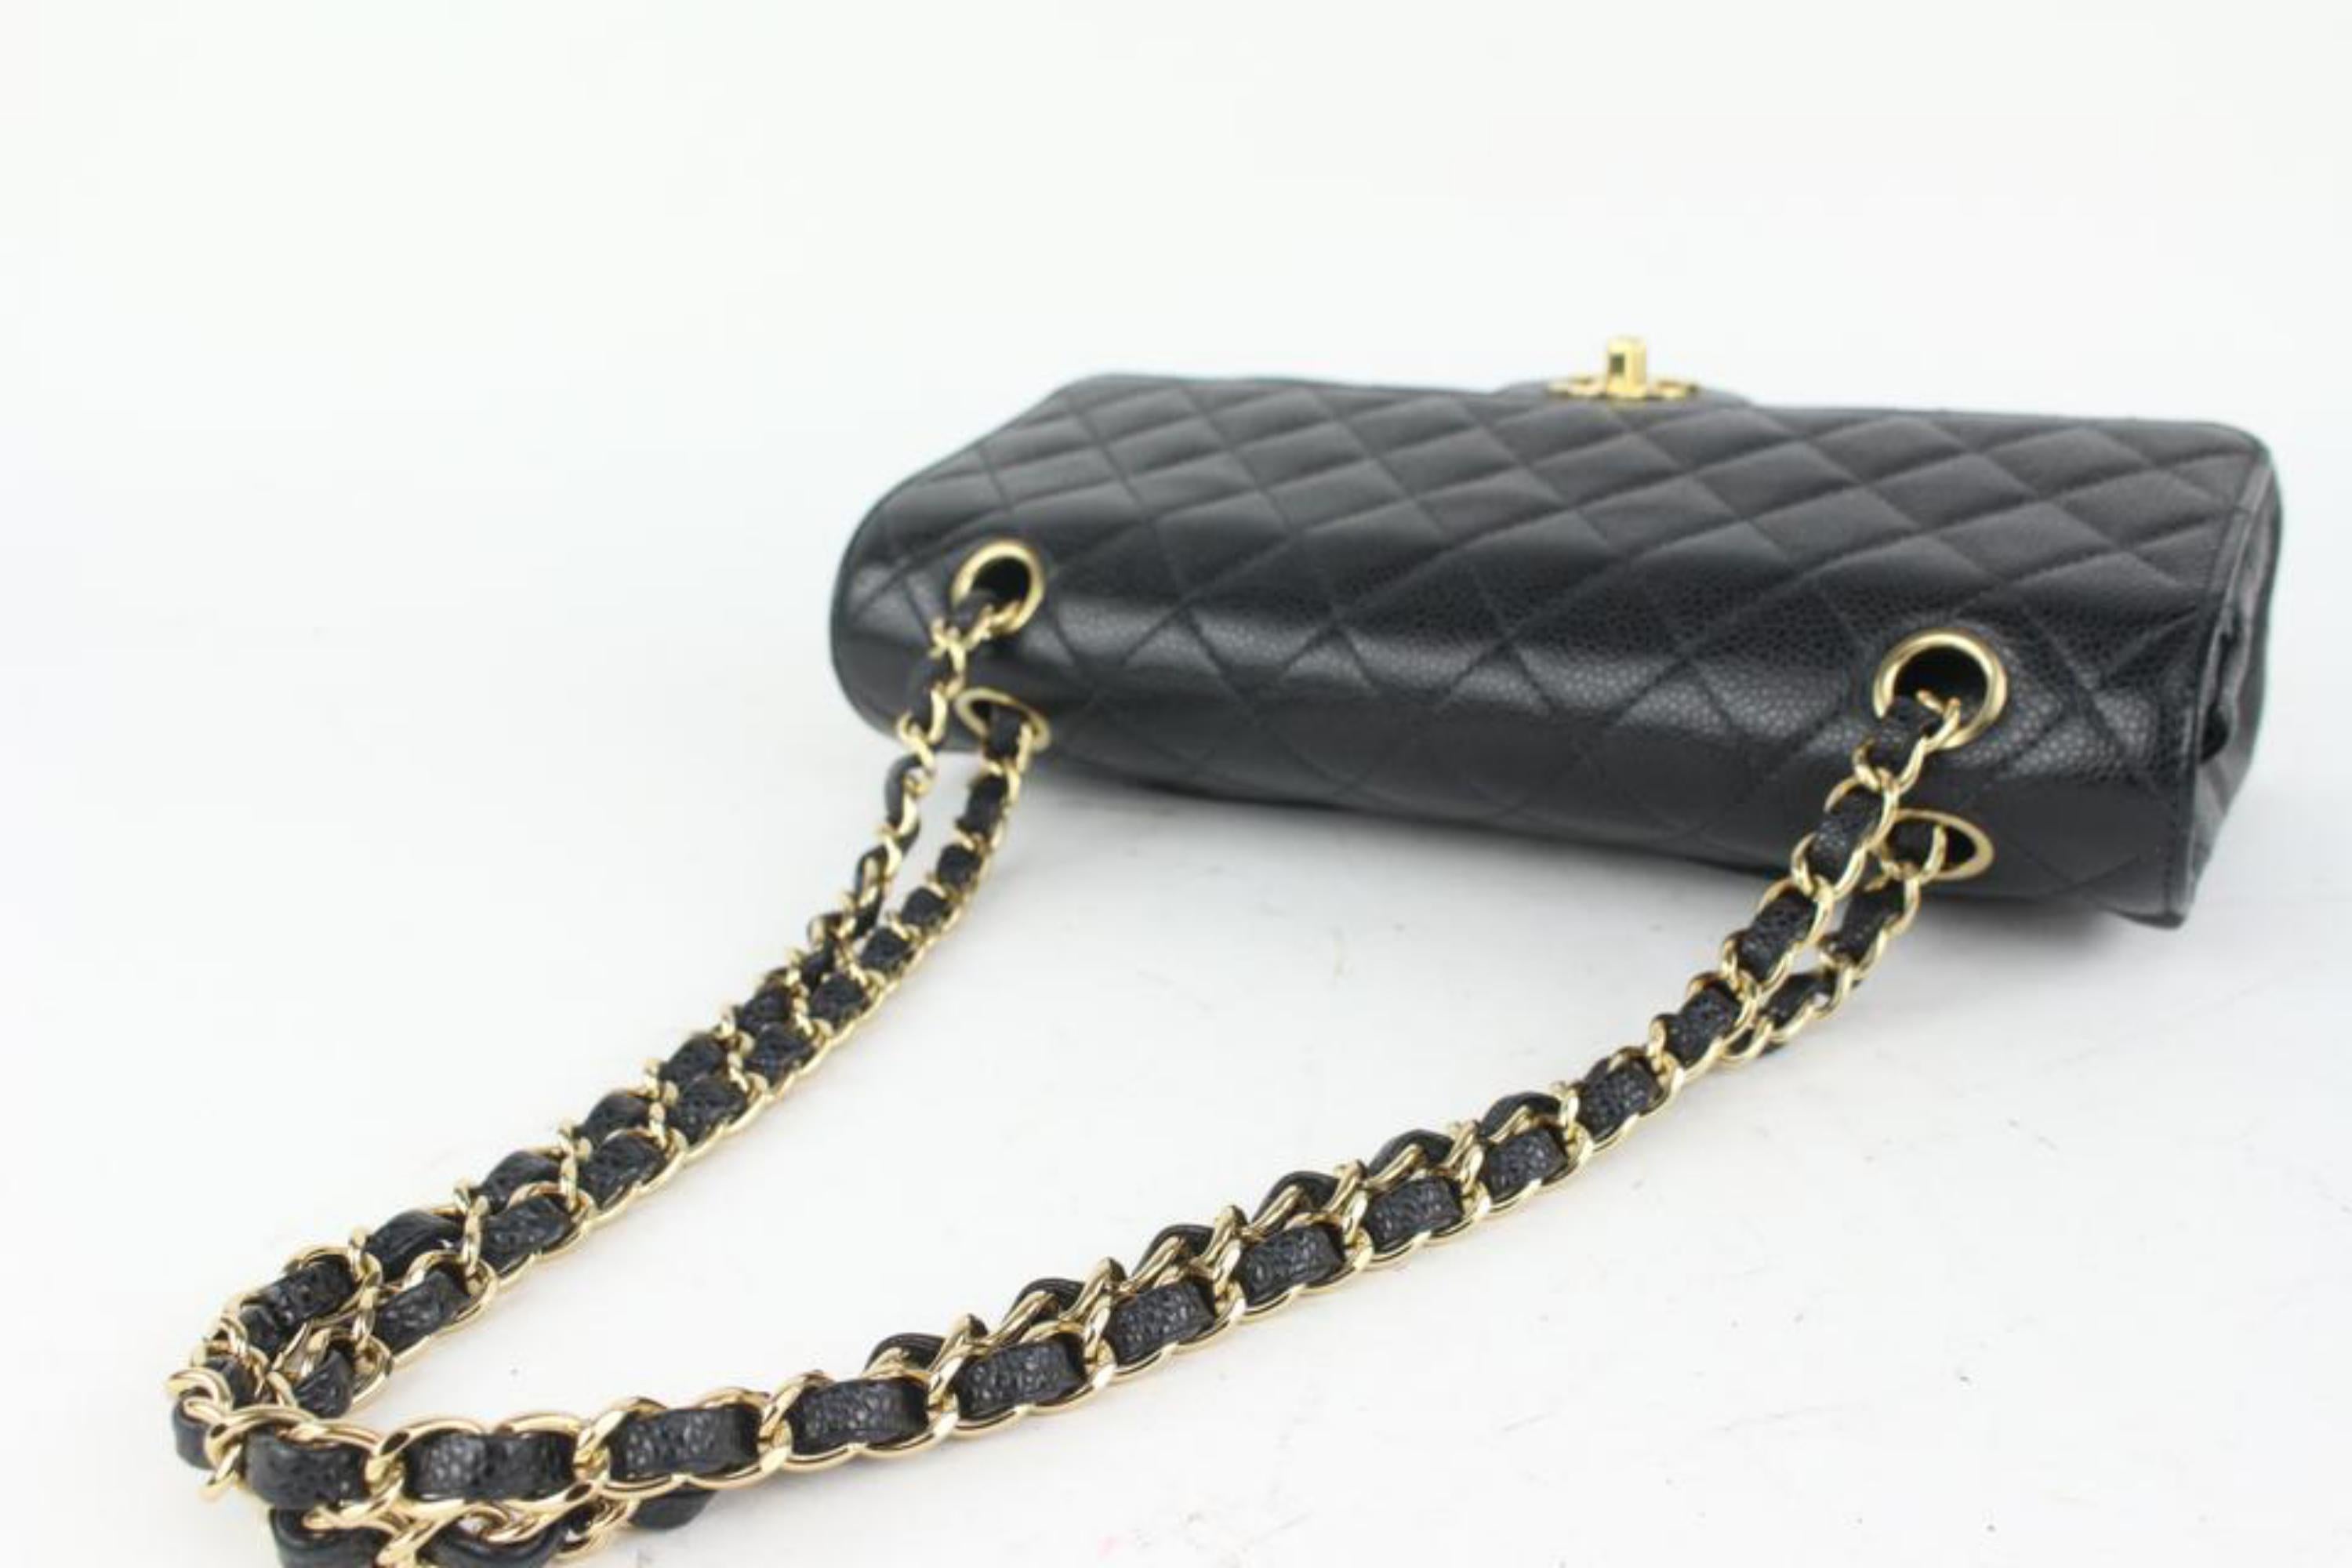 Chanel Black Quilted Caviar Medium Double Classic Flap Gold Chain Bag 1014c25 1